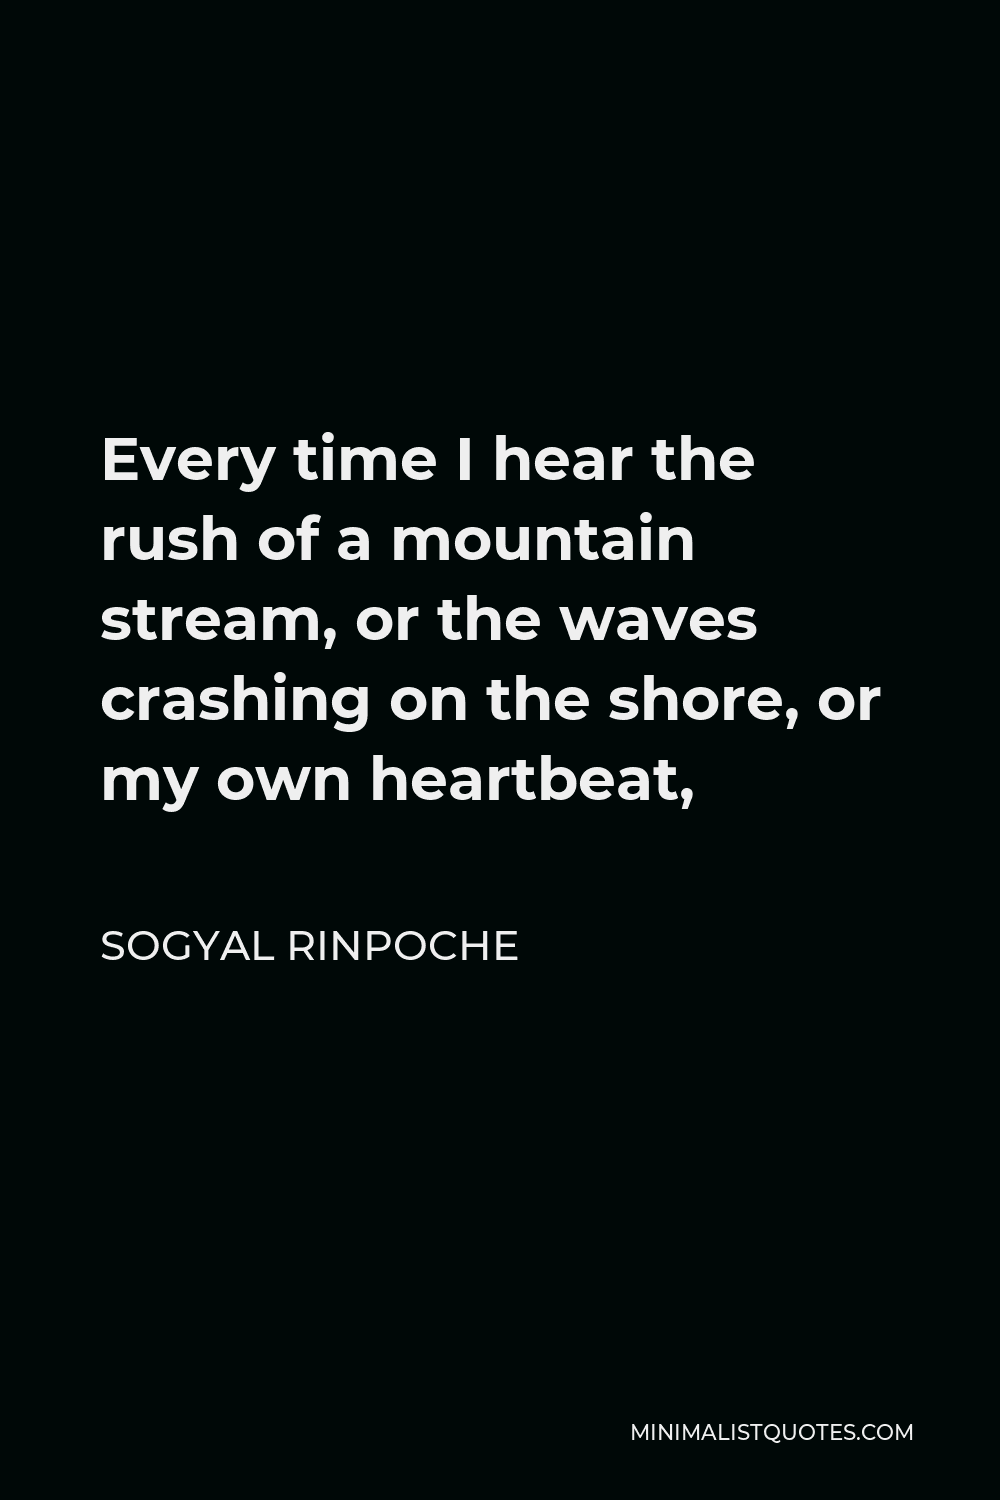 Sogyal Rinpoche Quote - Every time I hear the rush of a mountain stream, or the waves crashing on the shore, or my own heartbeat,